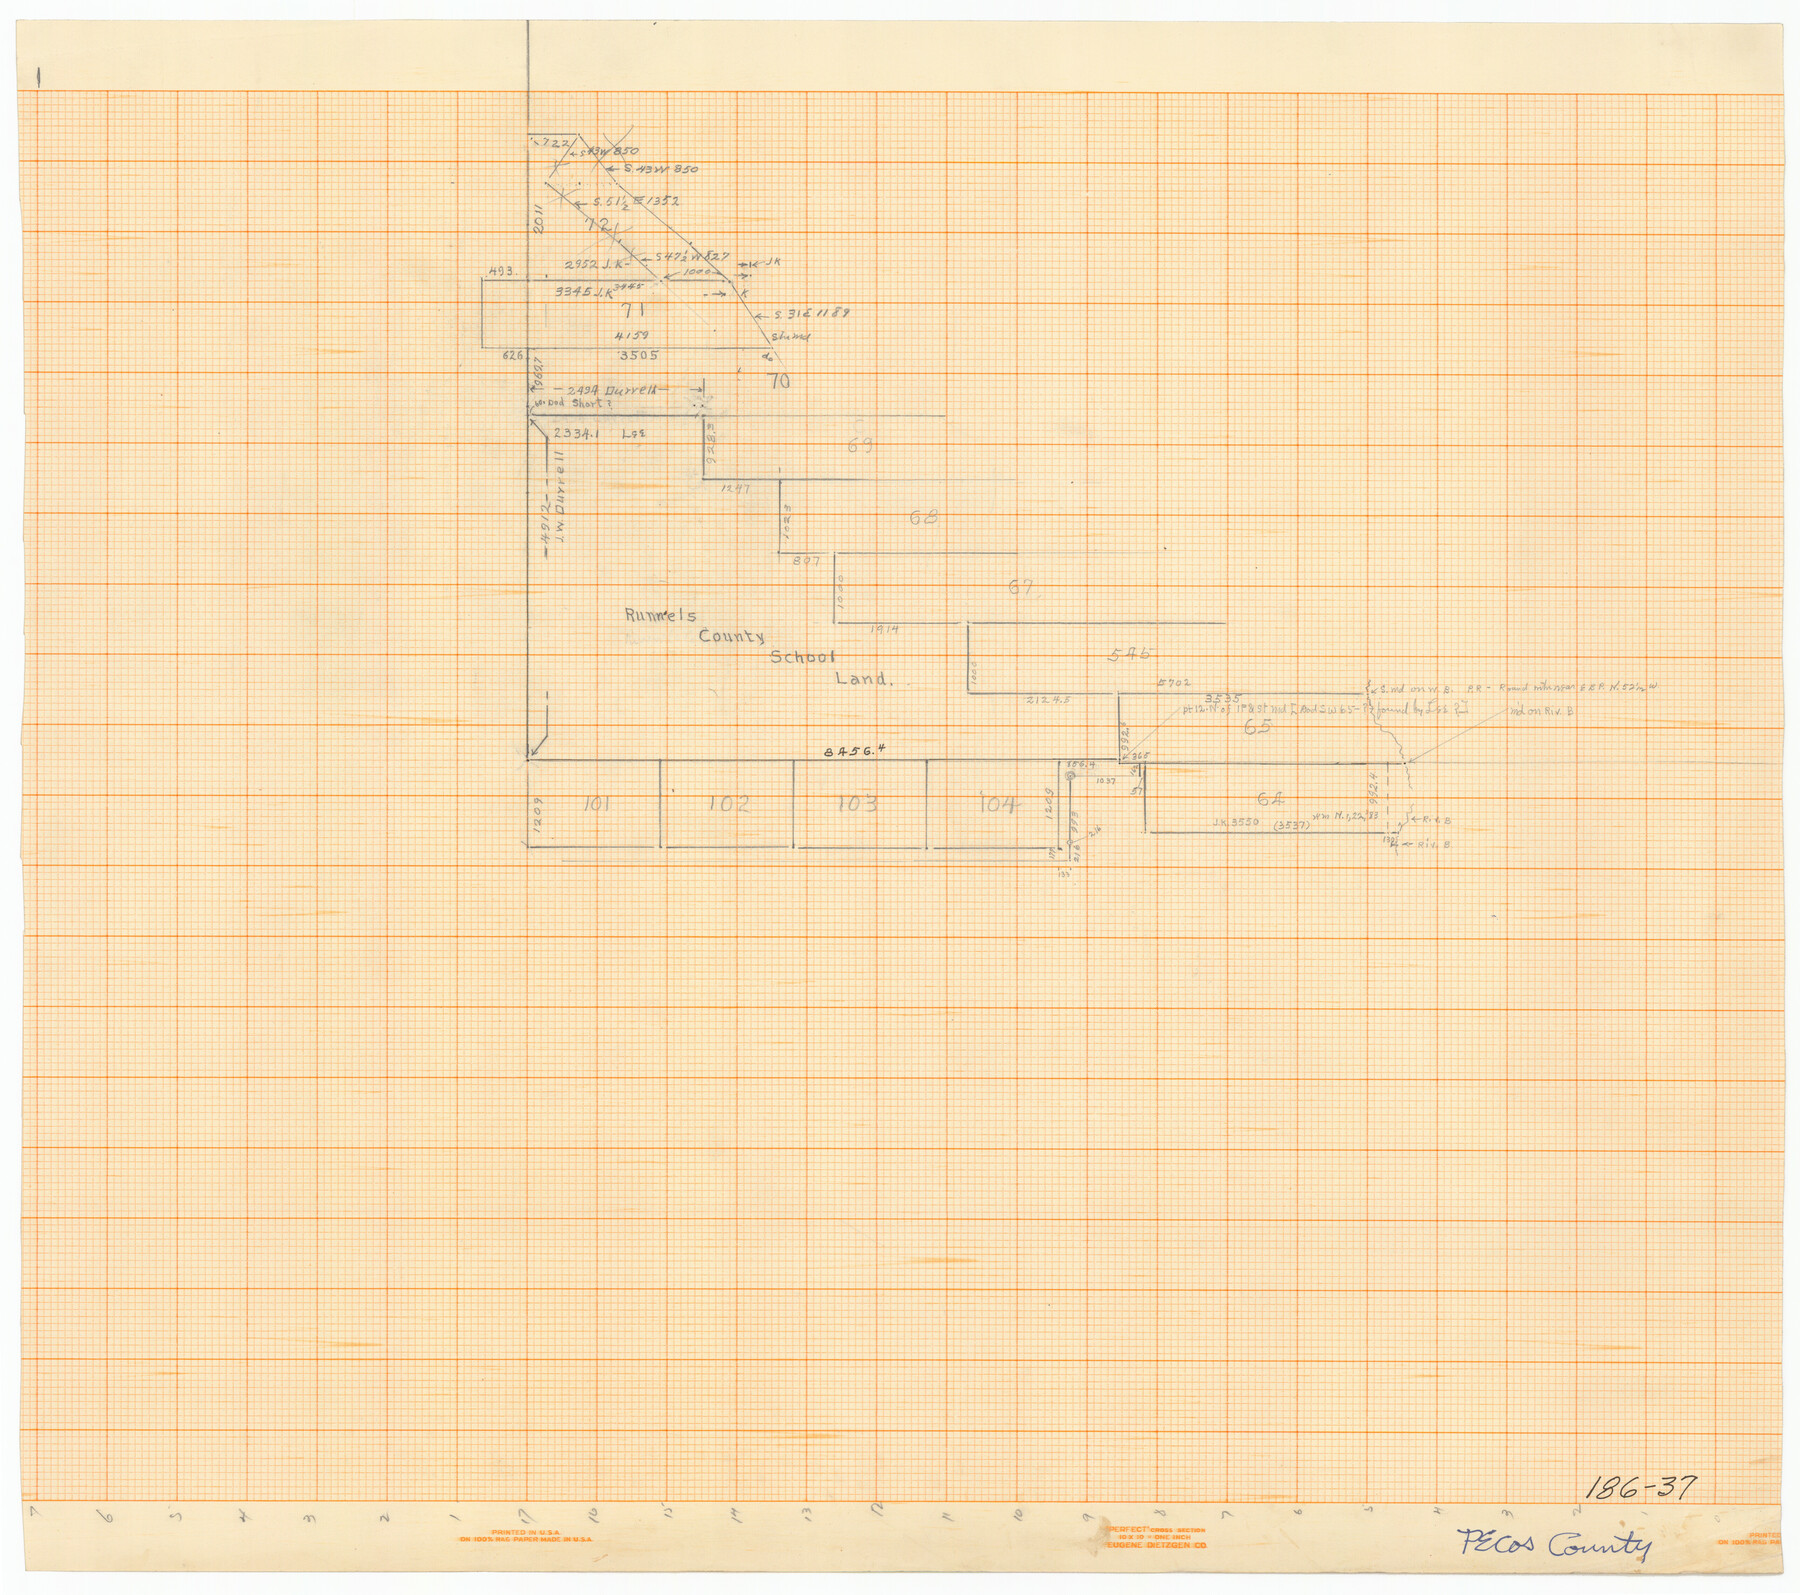 91666, [Sketch of Runnels County School Land and vicinity], Twichell Survey Records